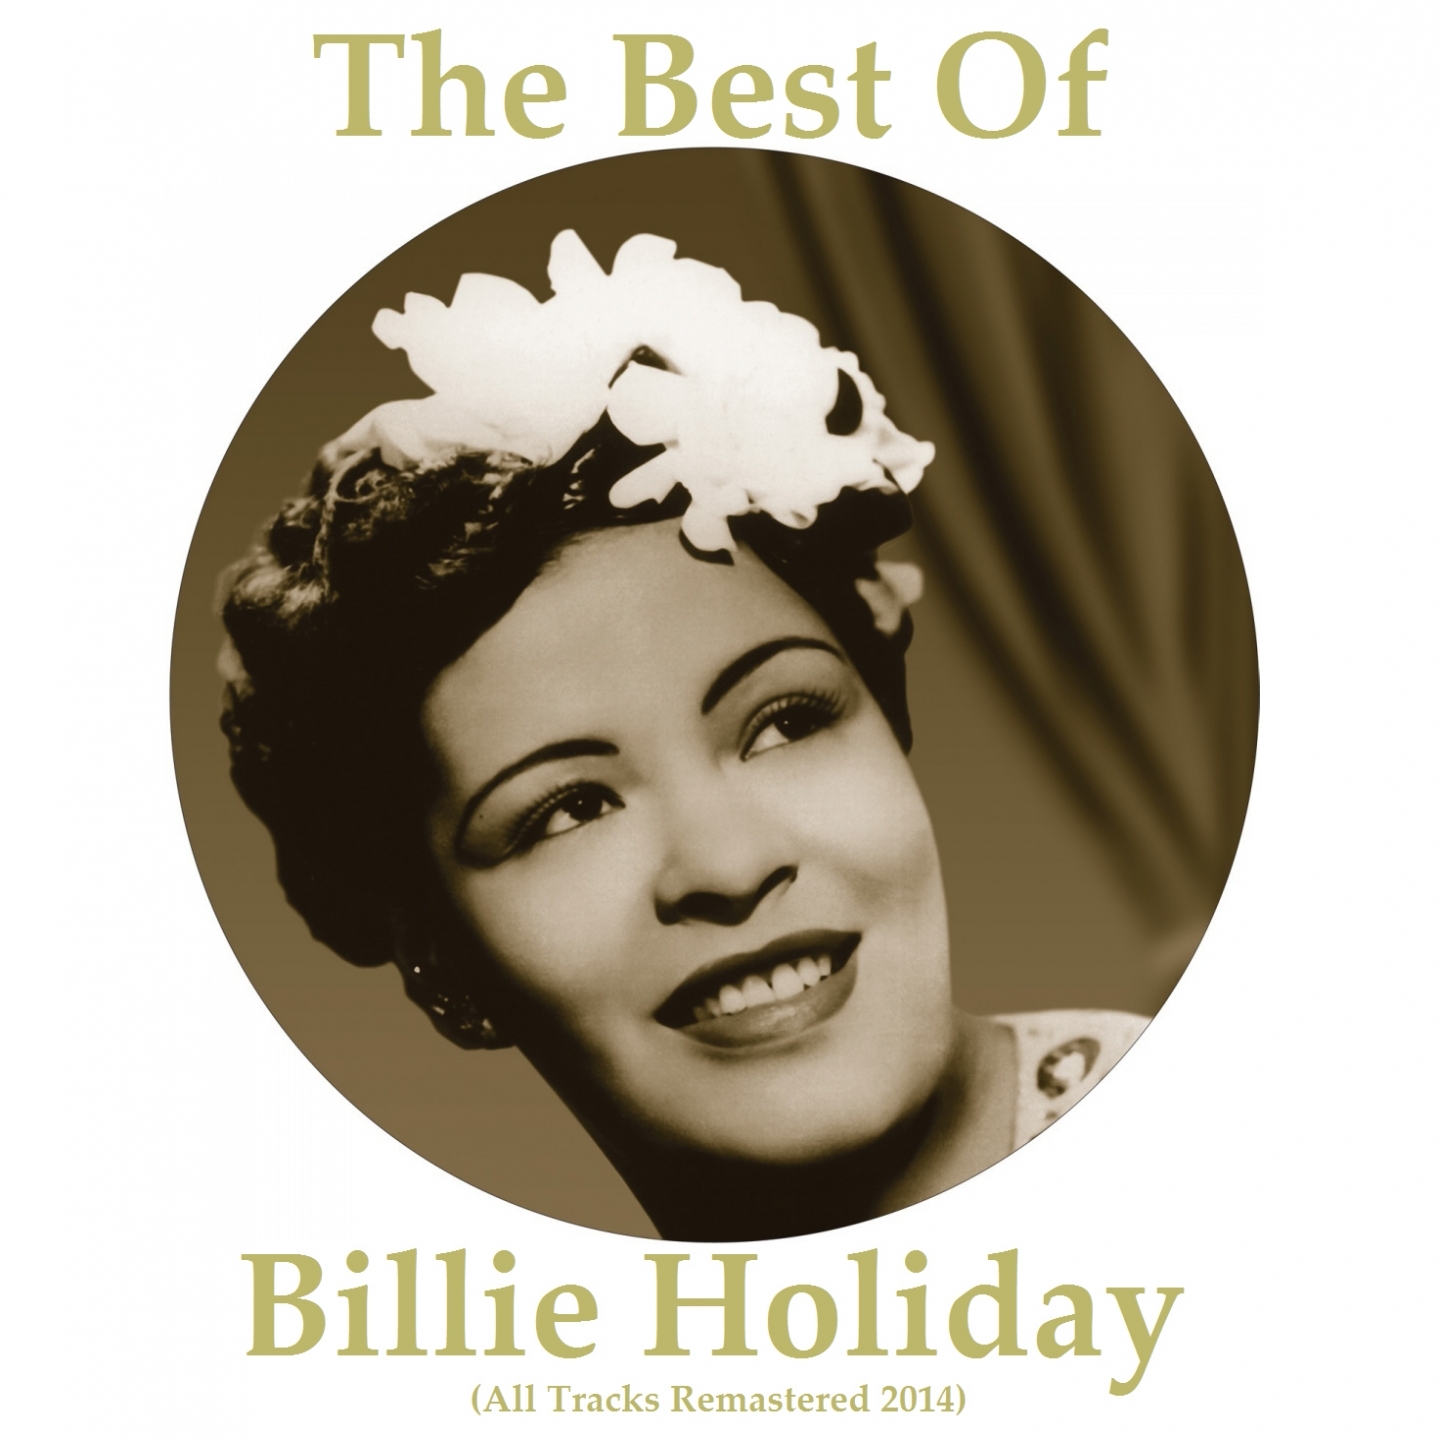 The Best of Billie Holiday (All Tracks Remastered 2014)